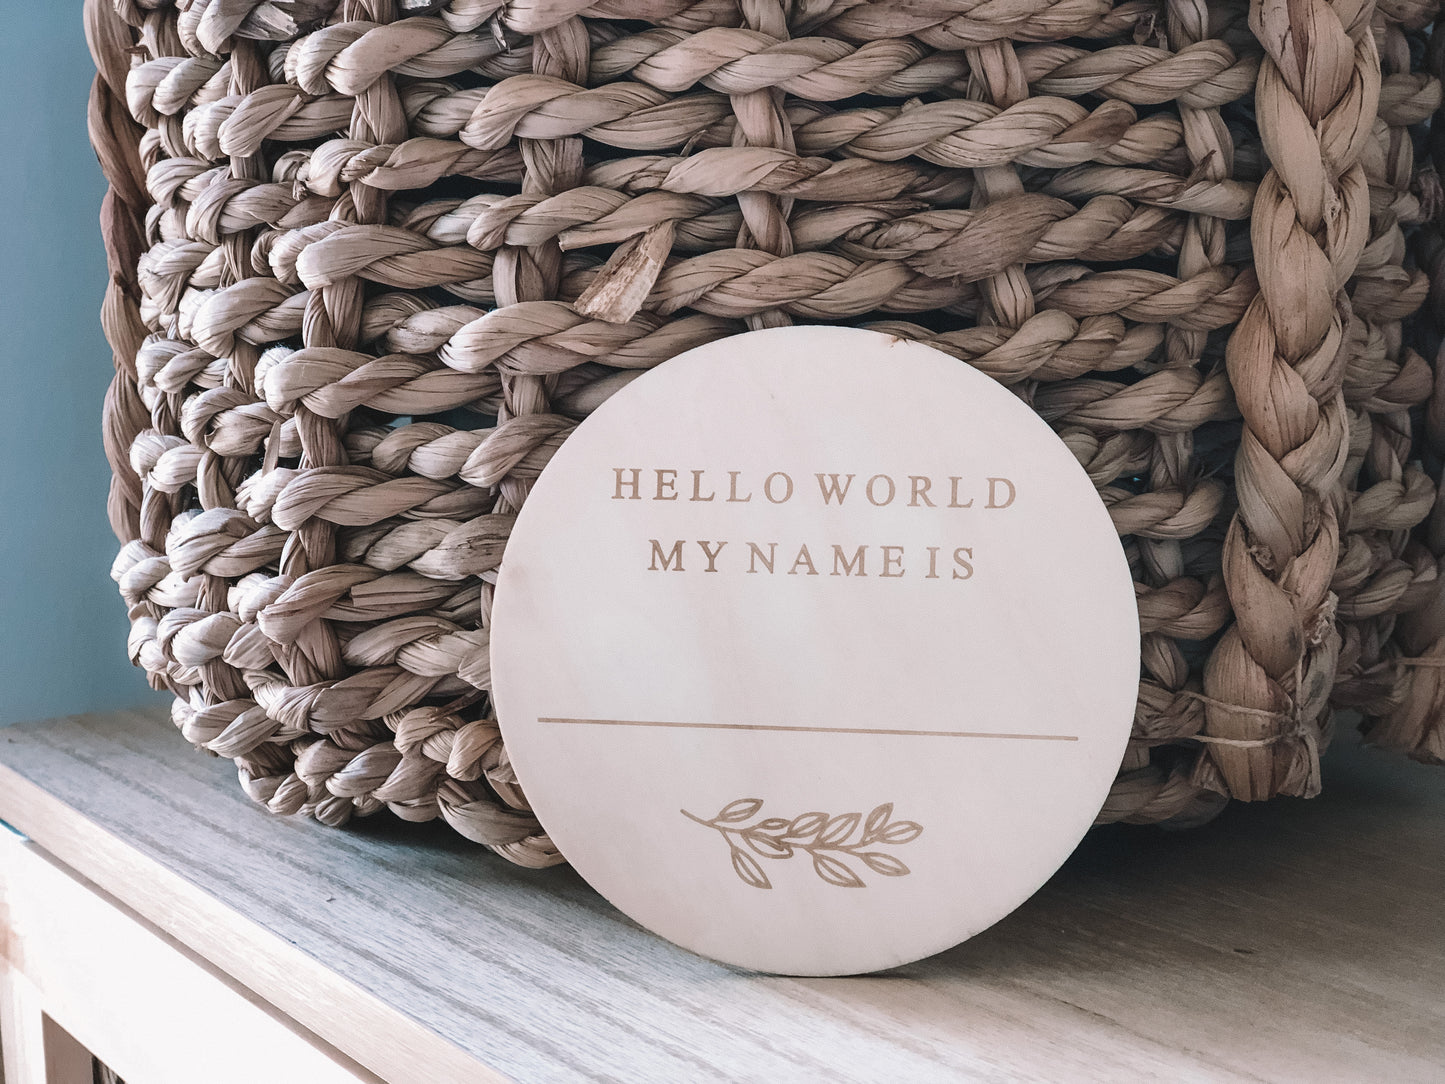 Hello World, My Name Is - Announcement Plaque